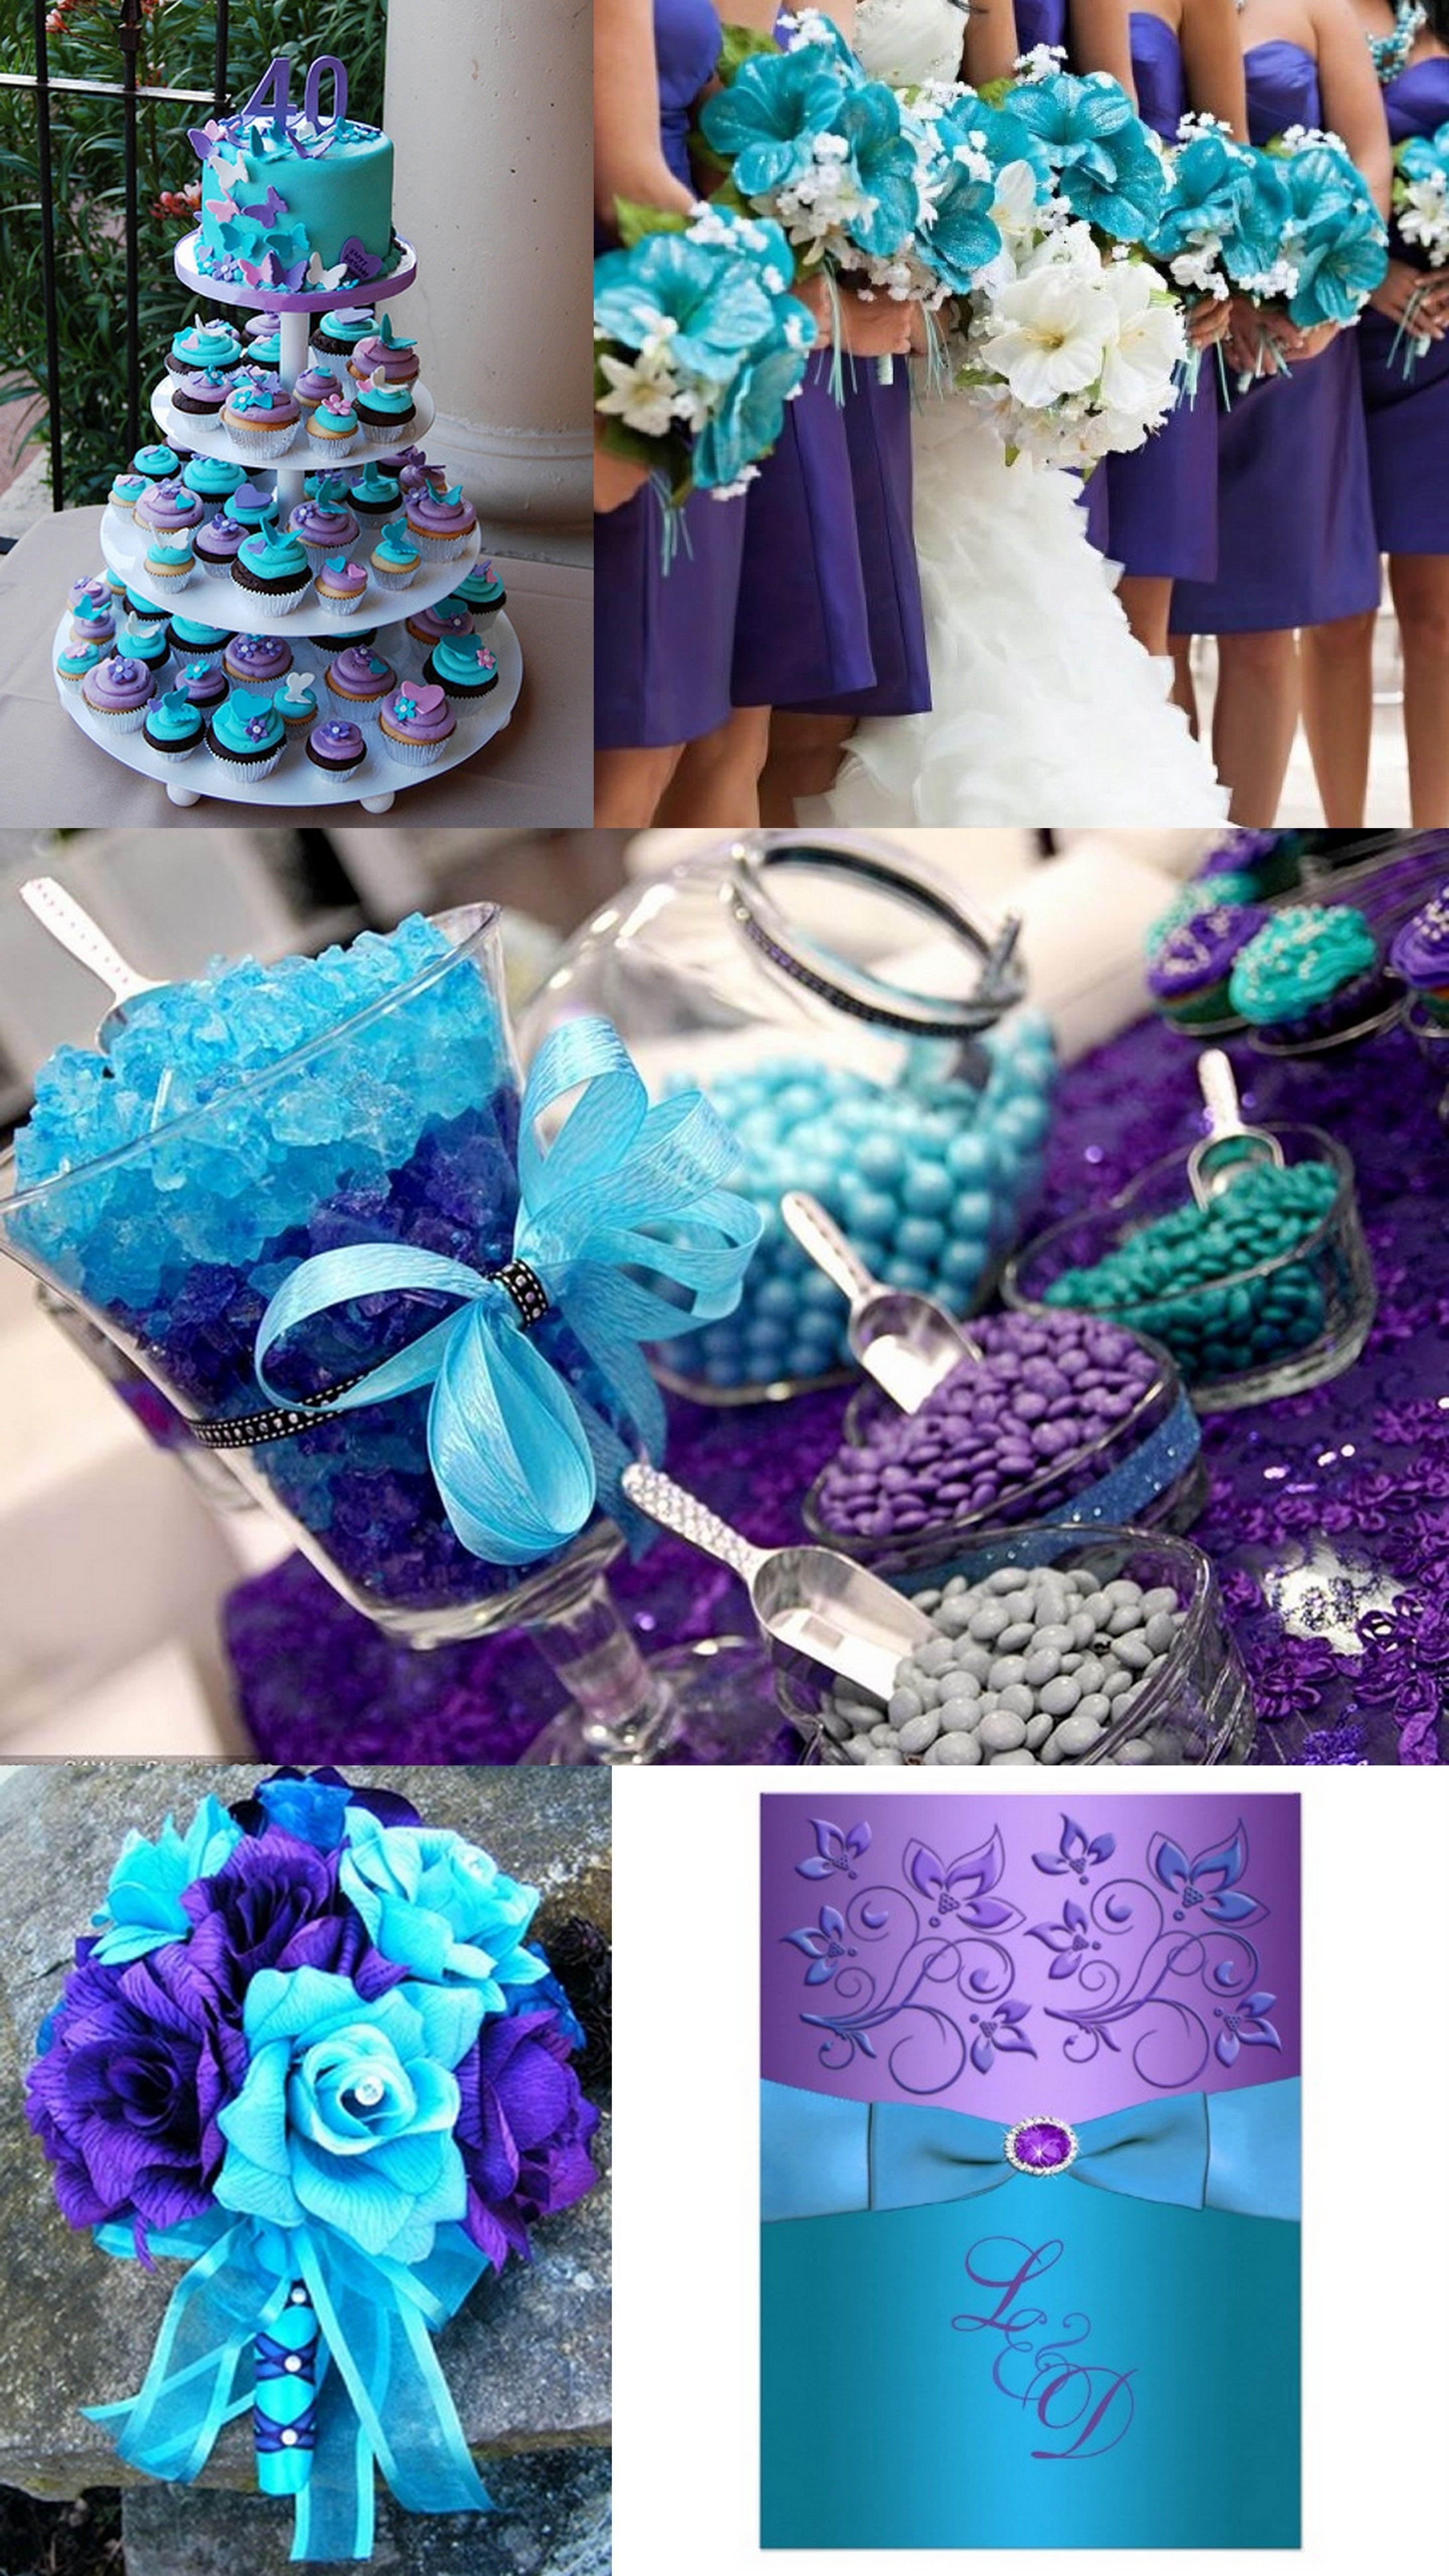 10 Perfect Purple And Turquoise Wedding Ideas a9 event space turquoise weddings purple wedding and bright colours 2023